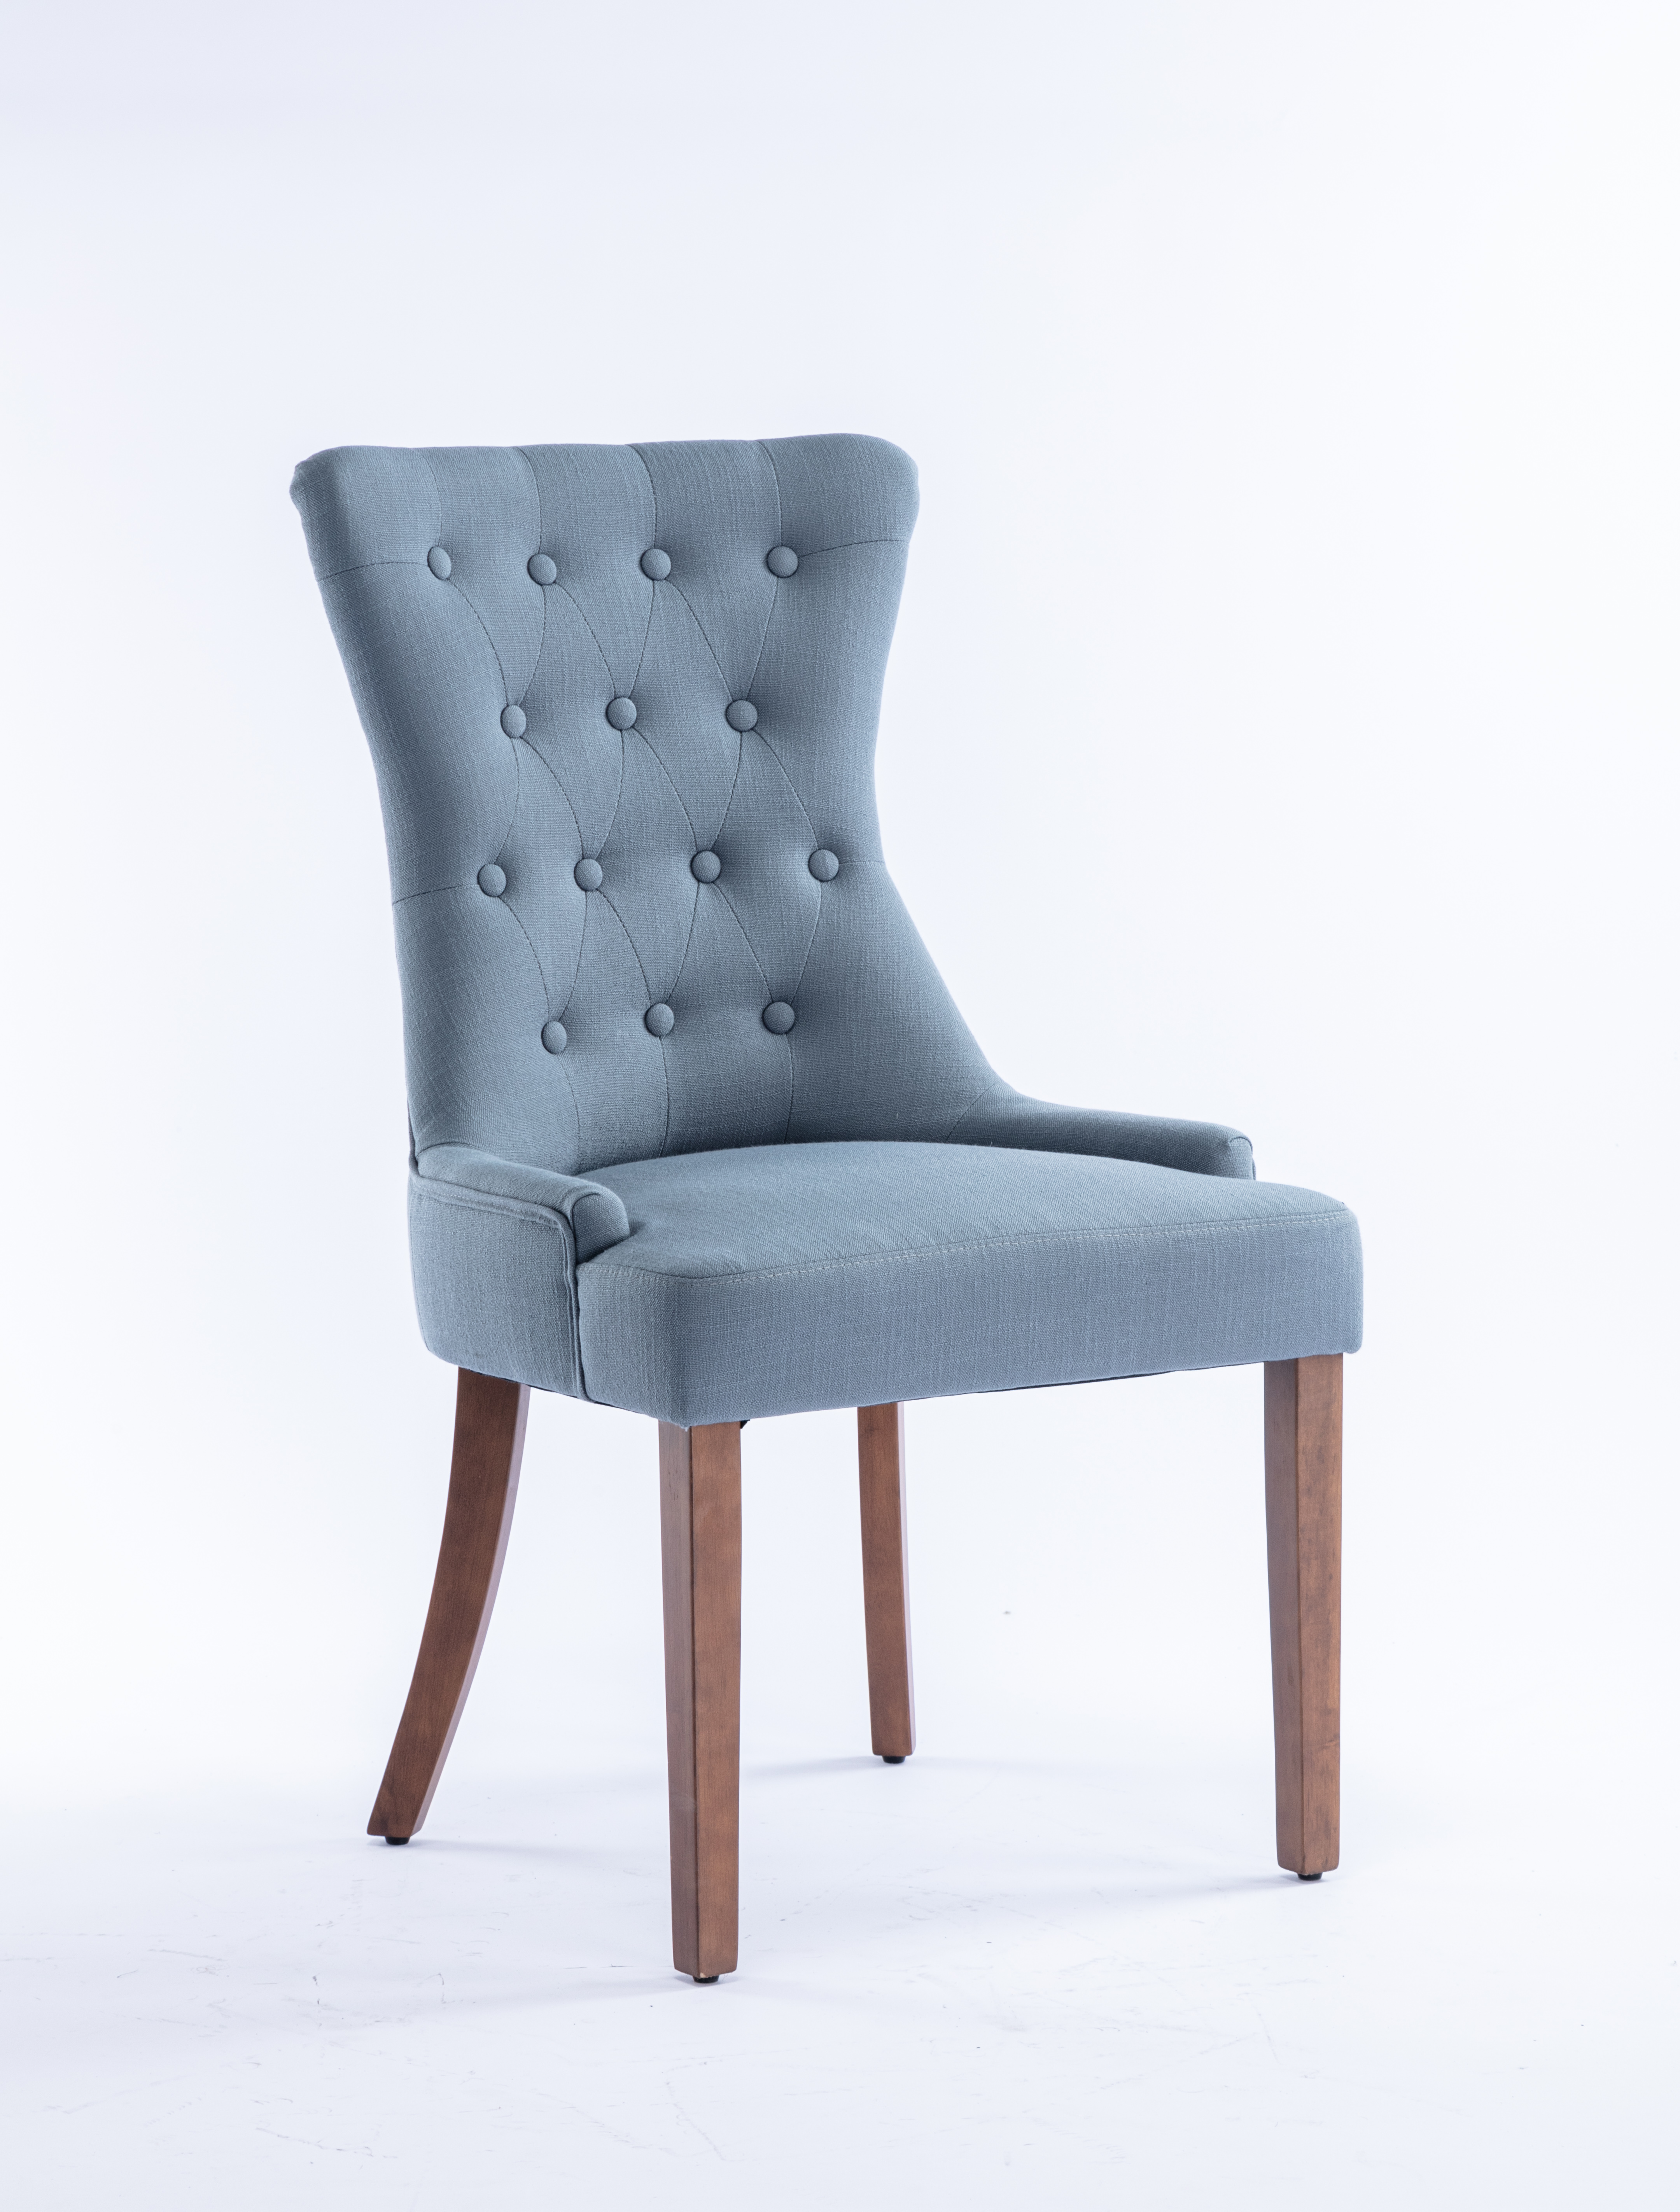 Classic Button Tufted Blue Linen Fabric Upholstered Dining Chair with Solid Wood Legs 2 PCS-Boyel Living